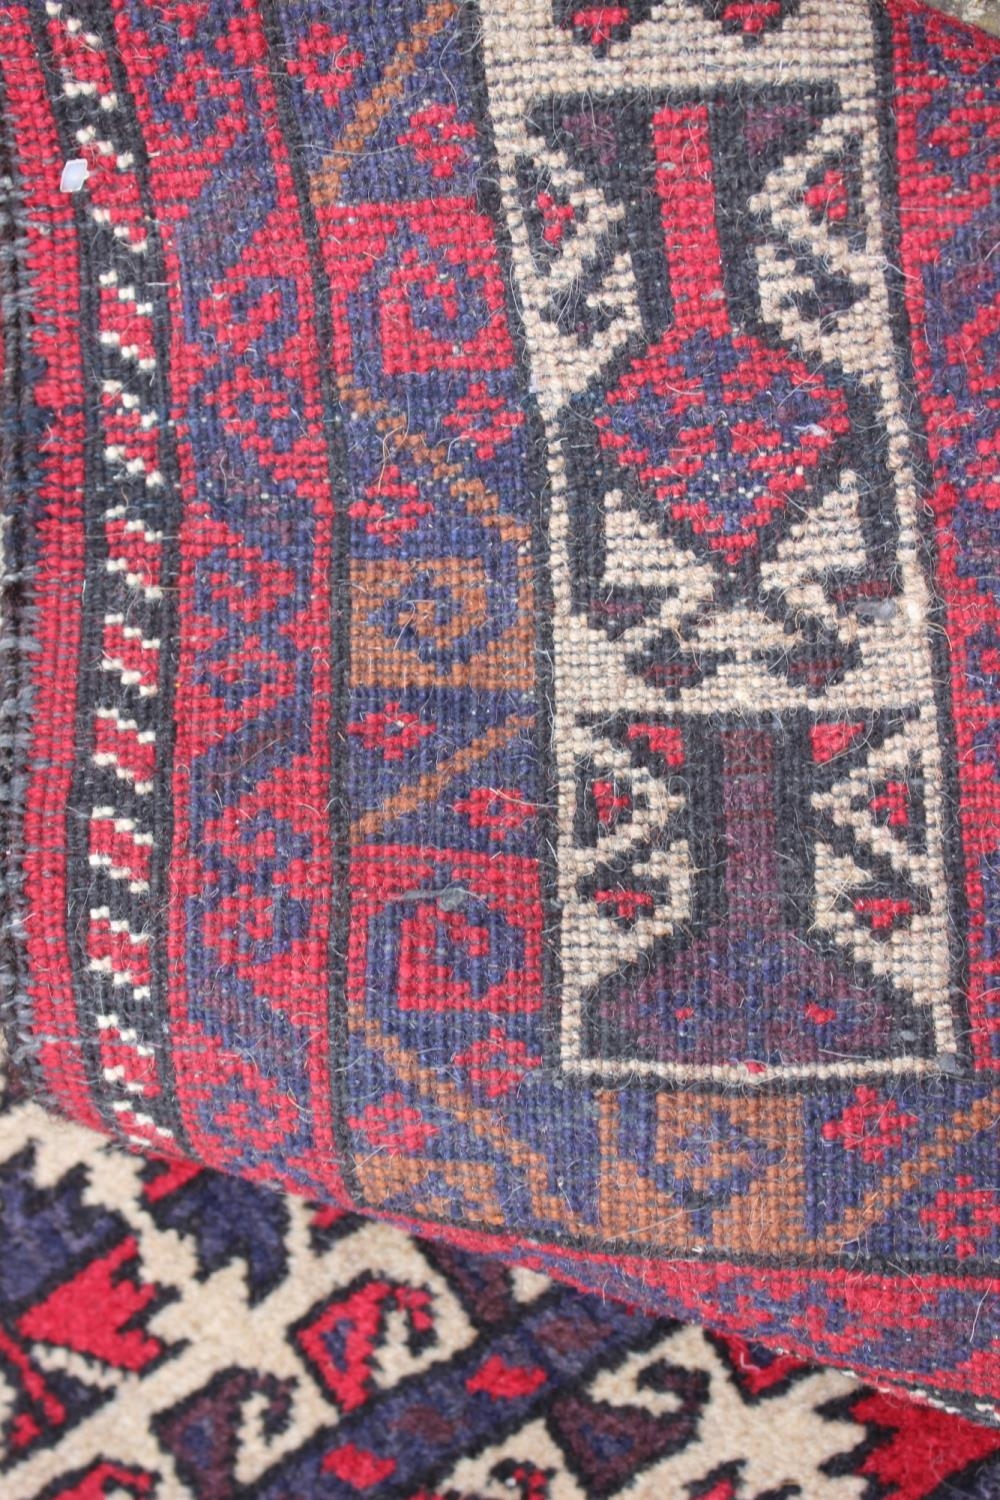 A Bokhara prayer rug of traditional design in shades of red, blue, brown, grey and natural, 32" wide - Image 2 of 3